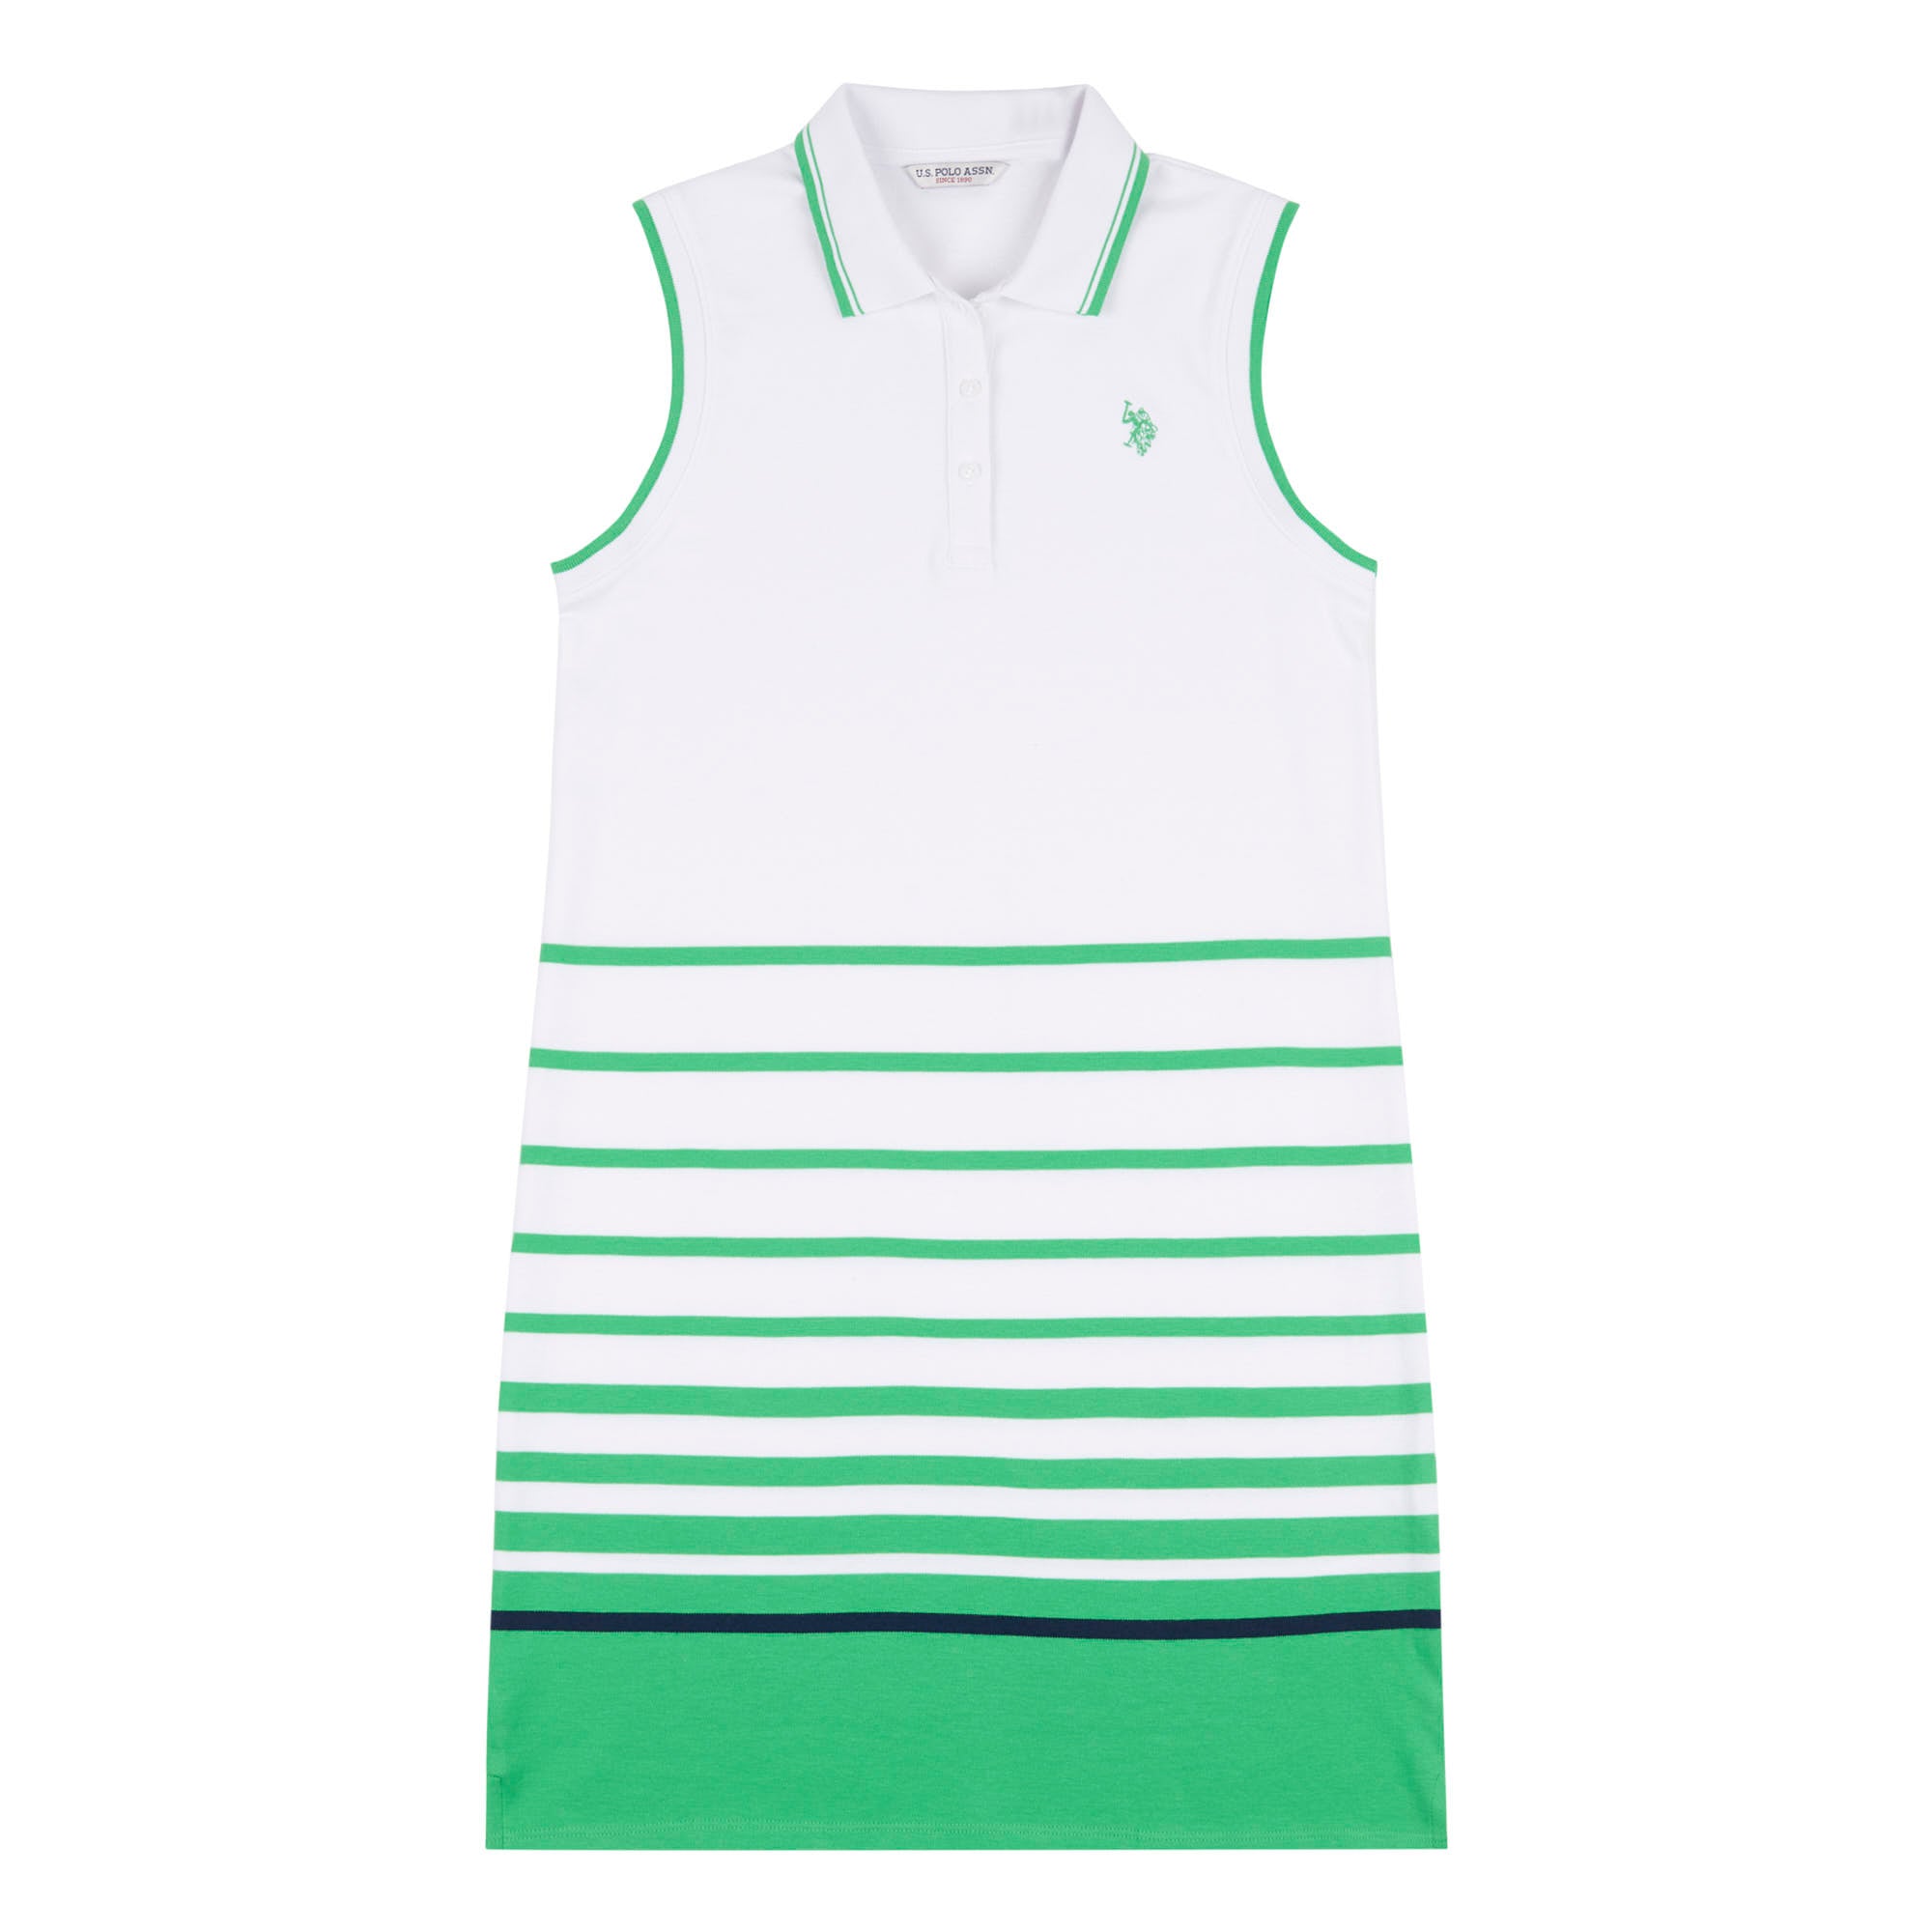 Womens Fitted Border Stripe Sleeveless Polo Dress in Island Green